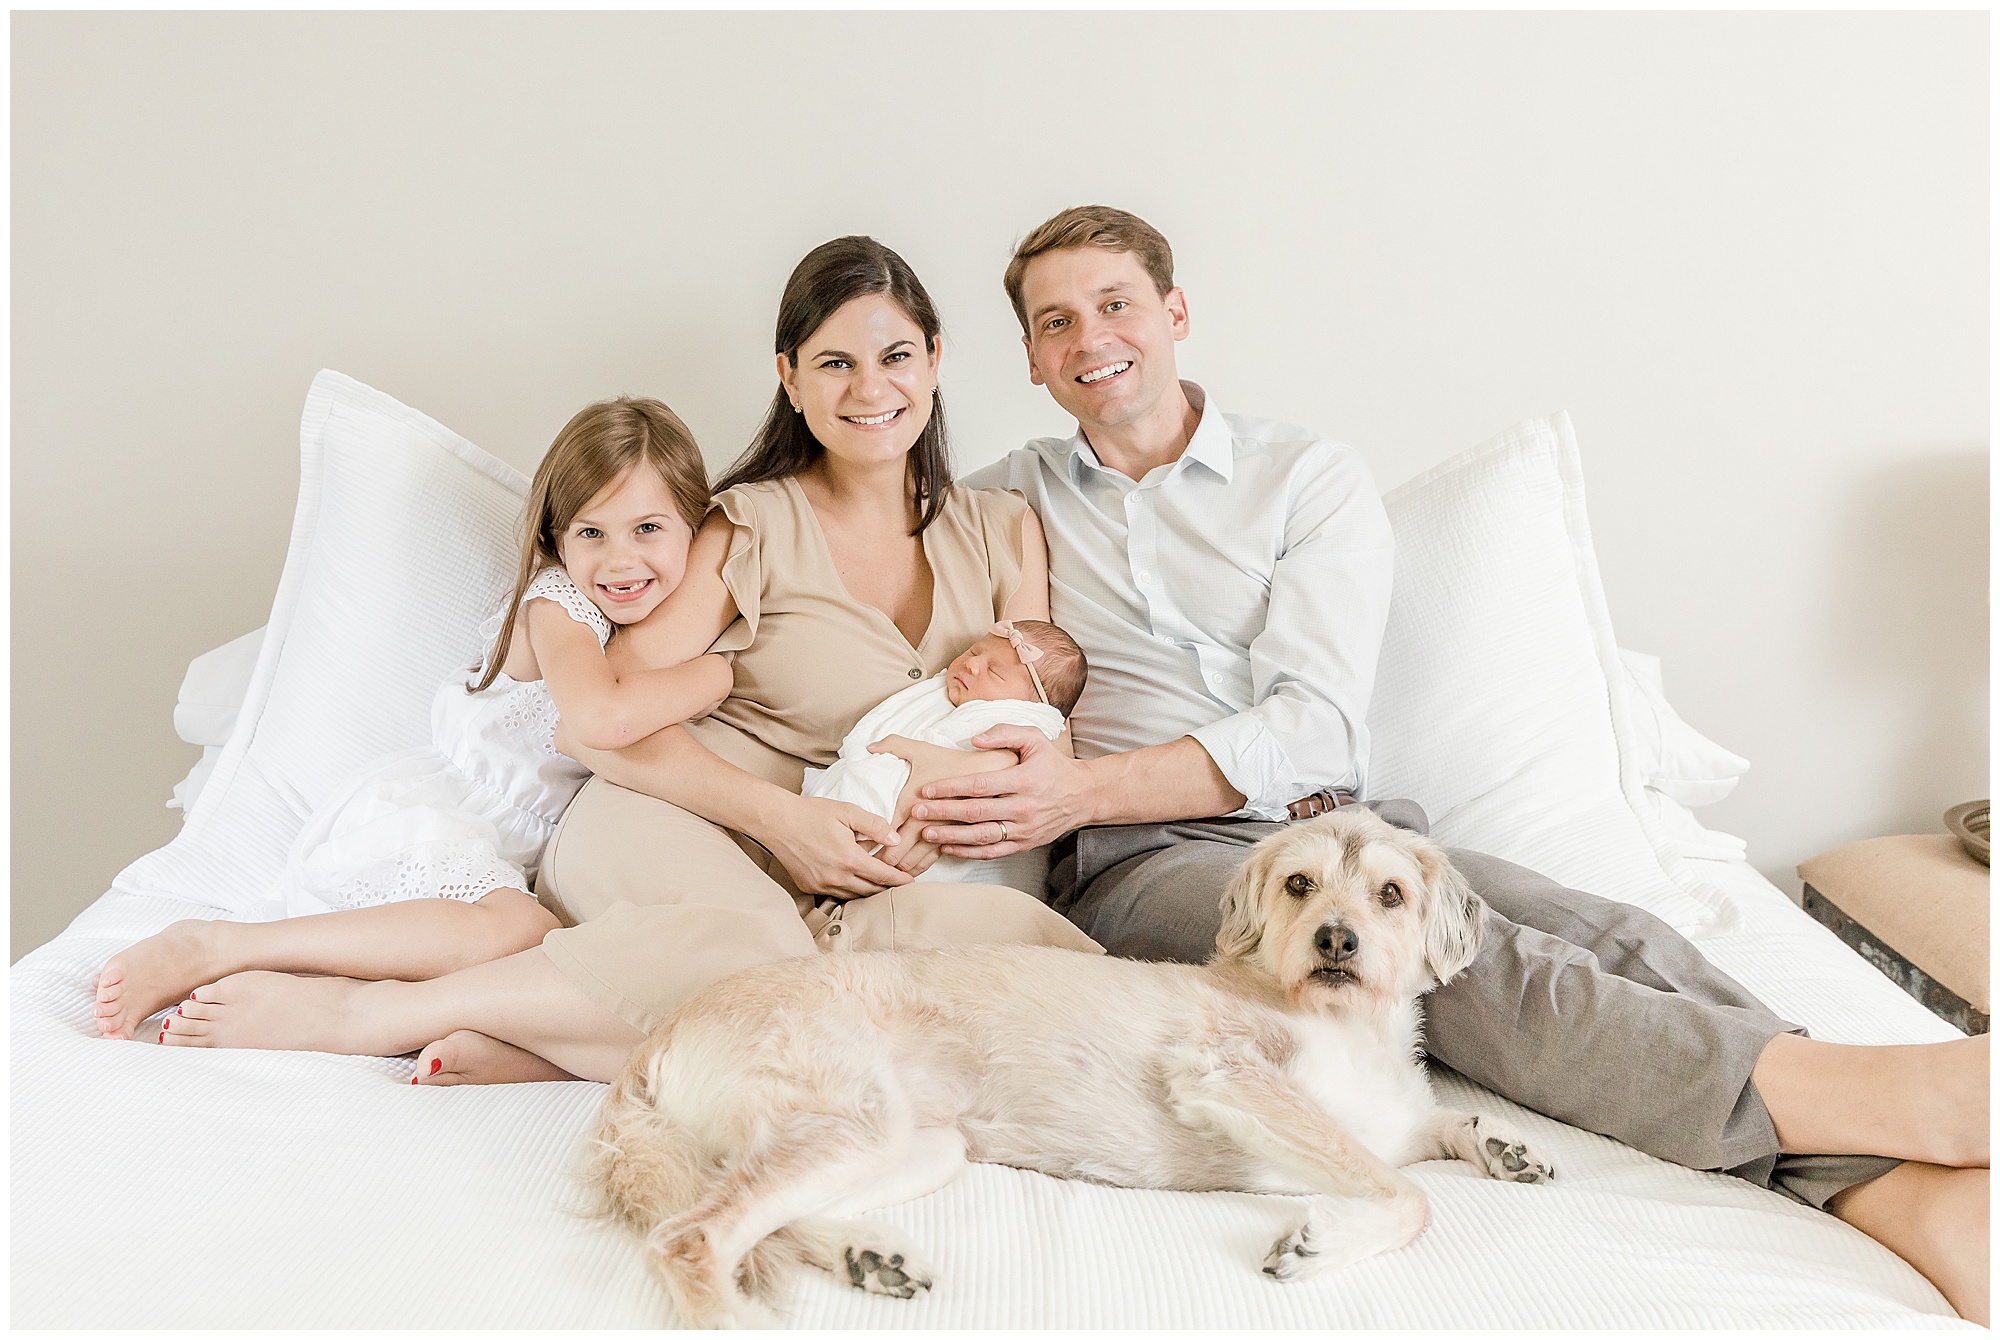 Family portrait of parents with their two daughters and dog sitting on a white bed.